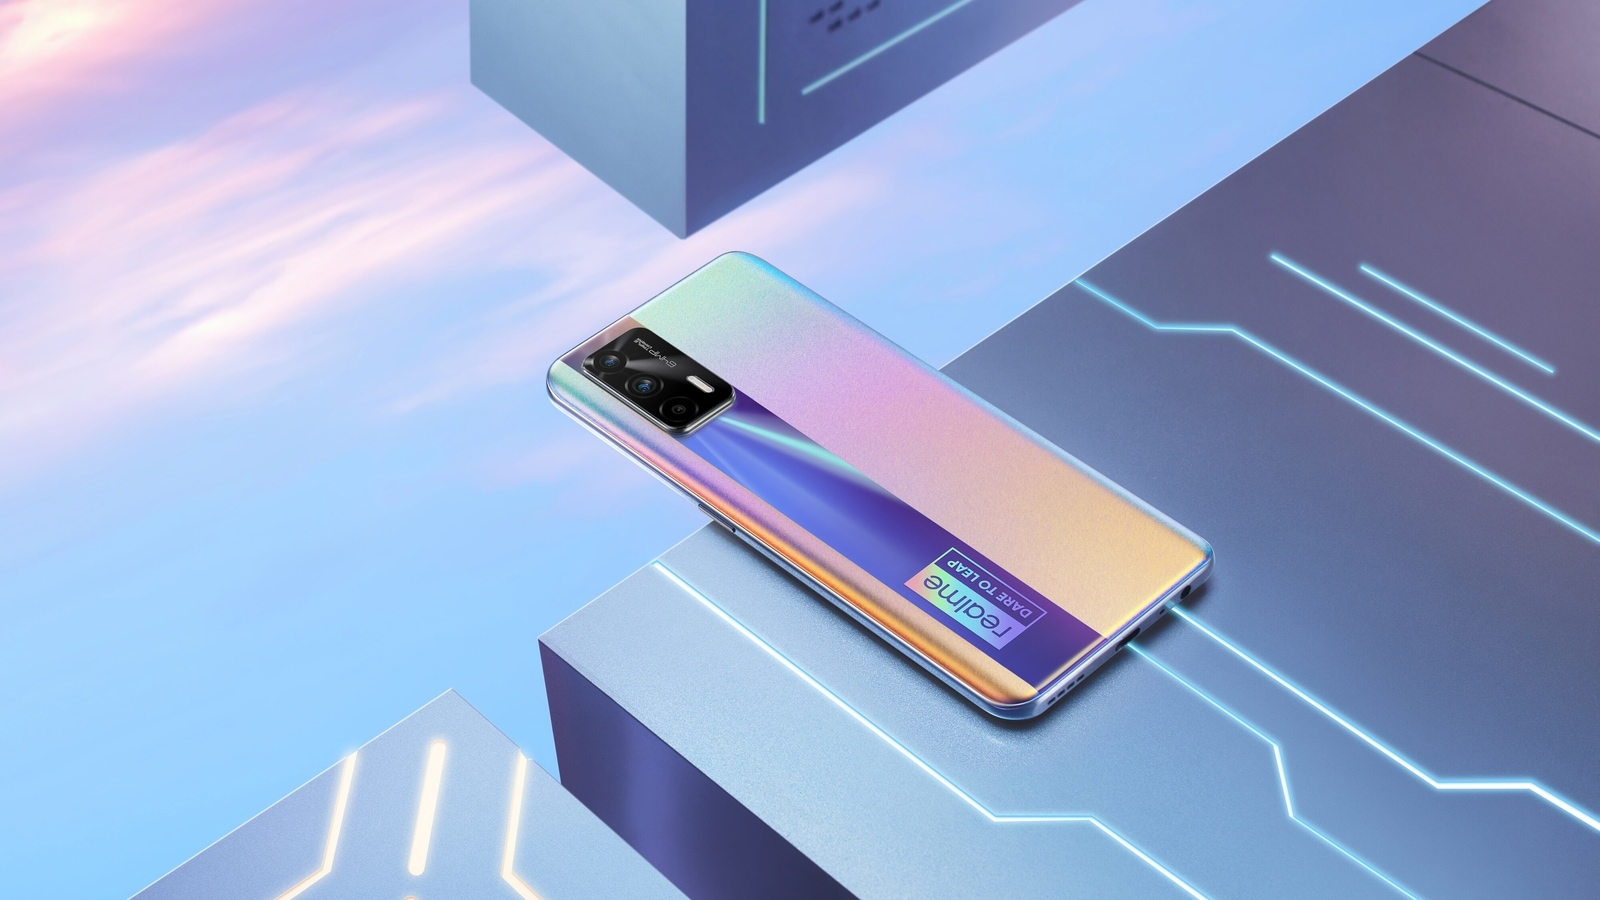 realme unveils 'Make it real' tag line as realme 12 Pro series images  surface